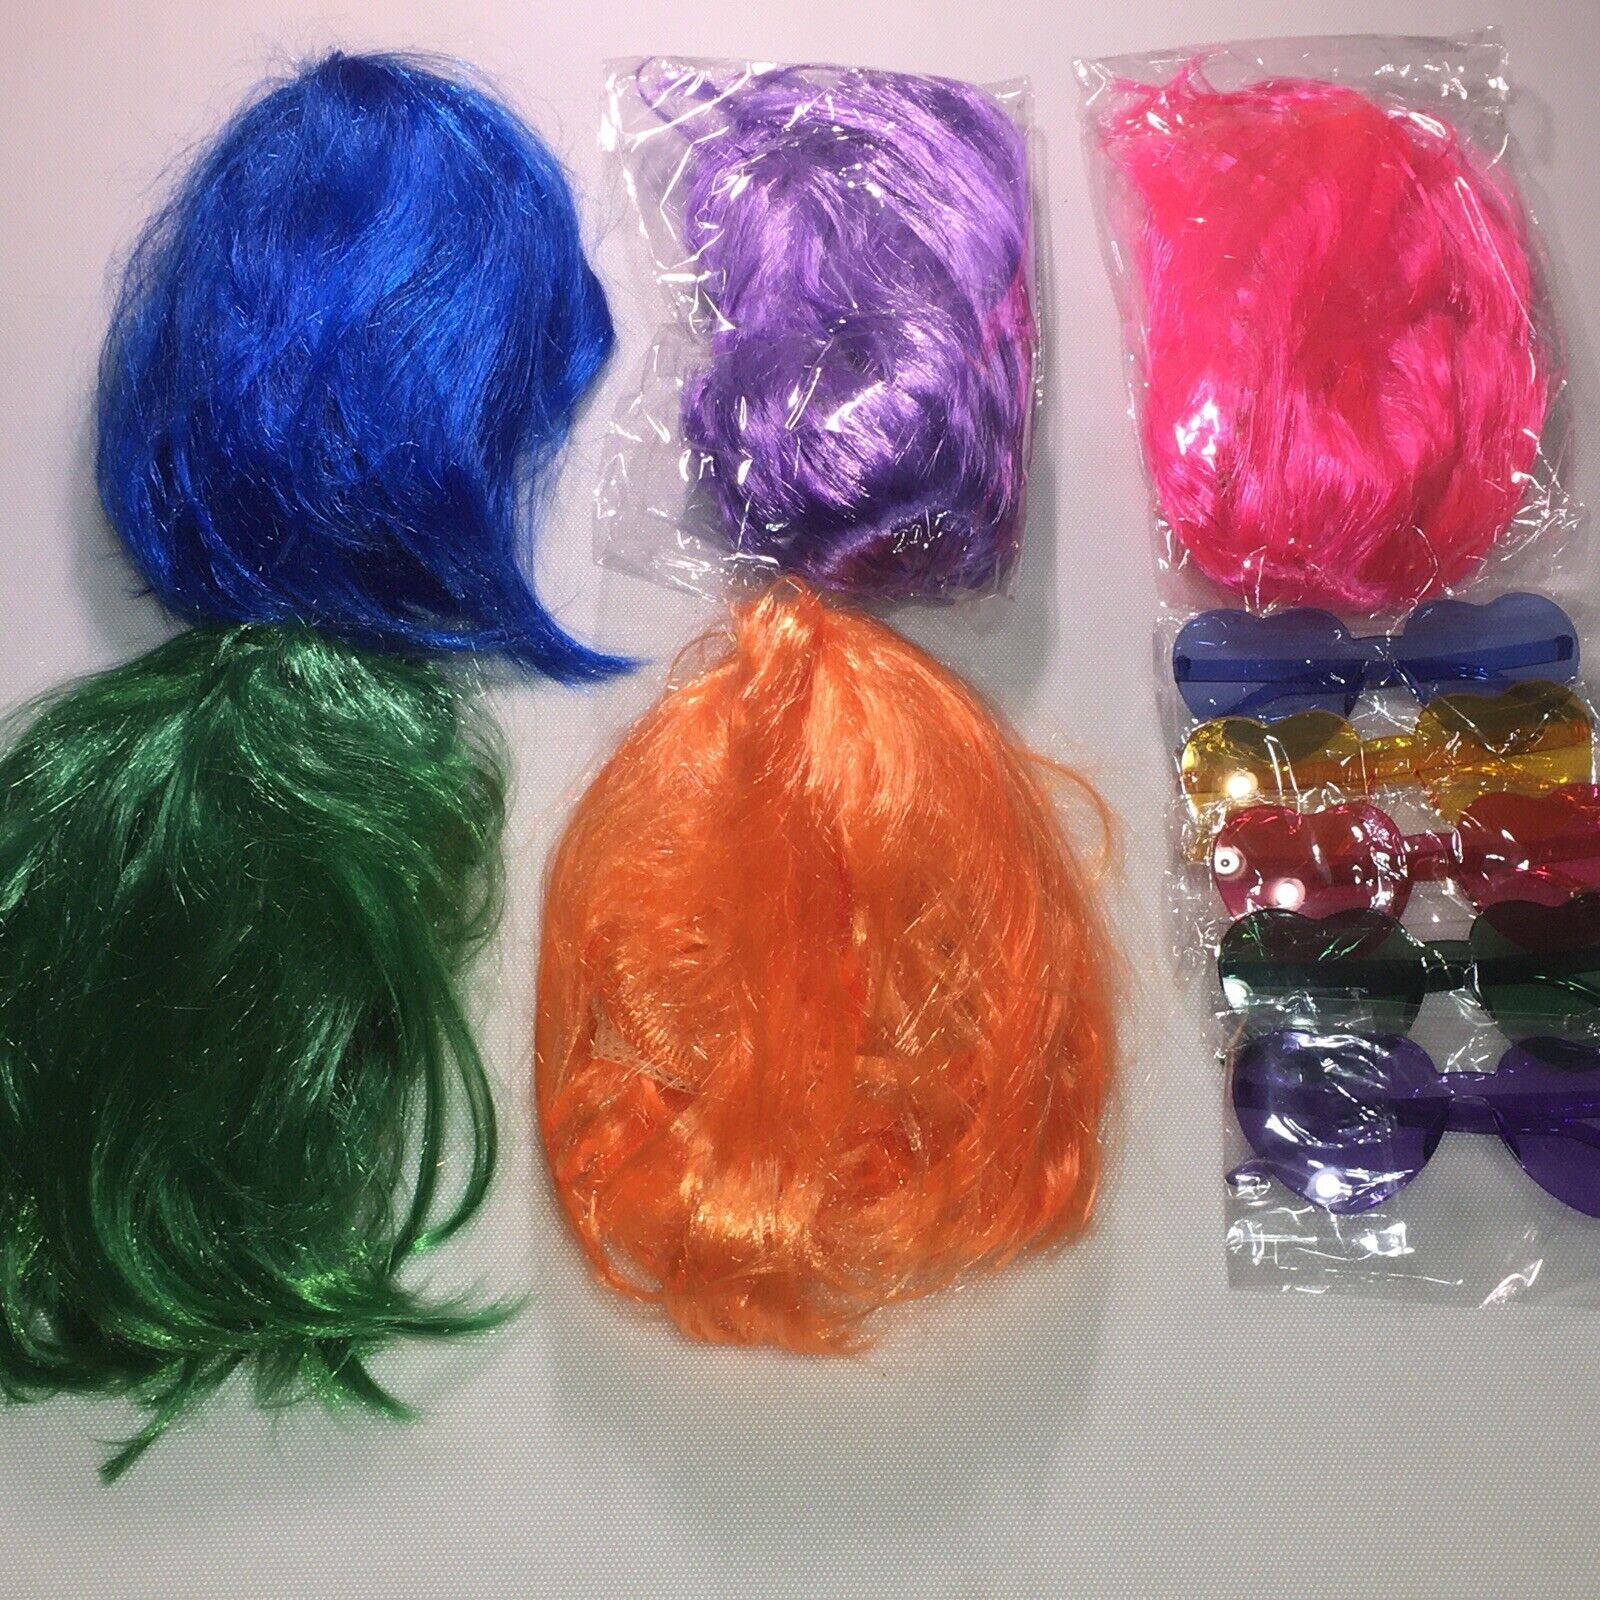 KUUQA 10 Pieces Party Wigs and Sunglass Set